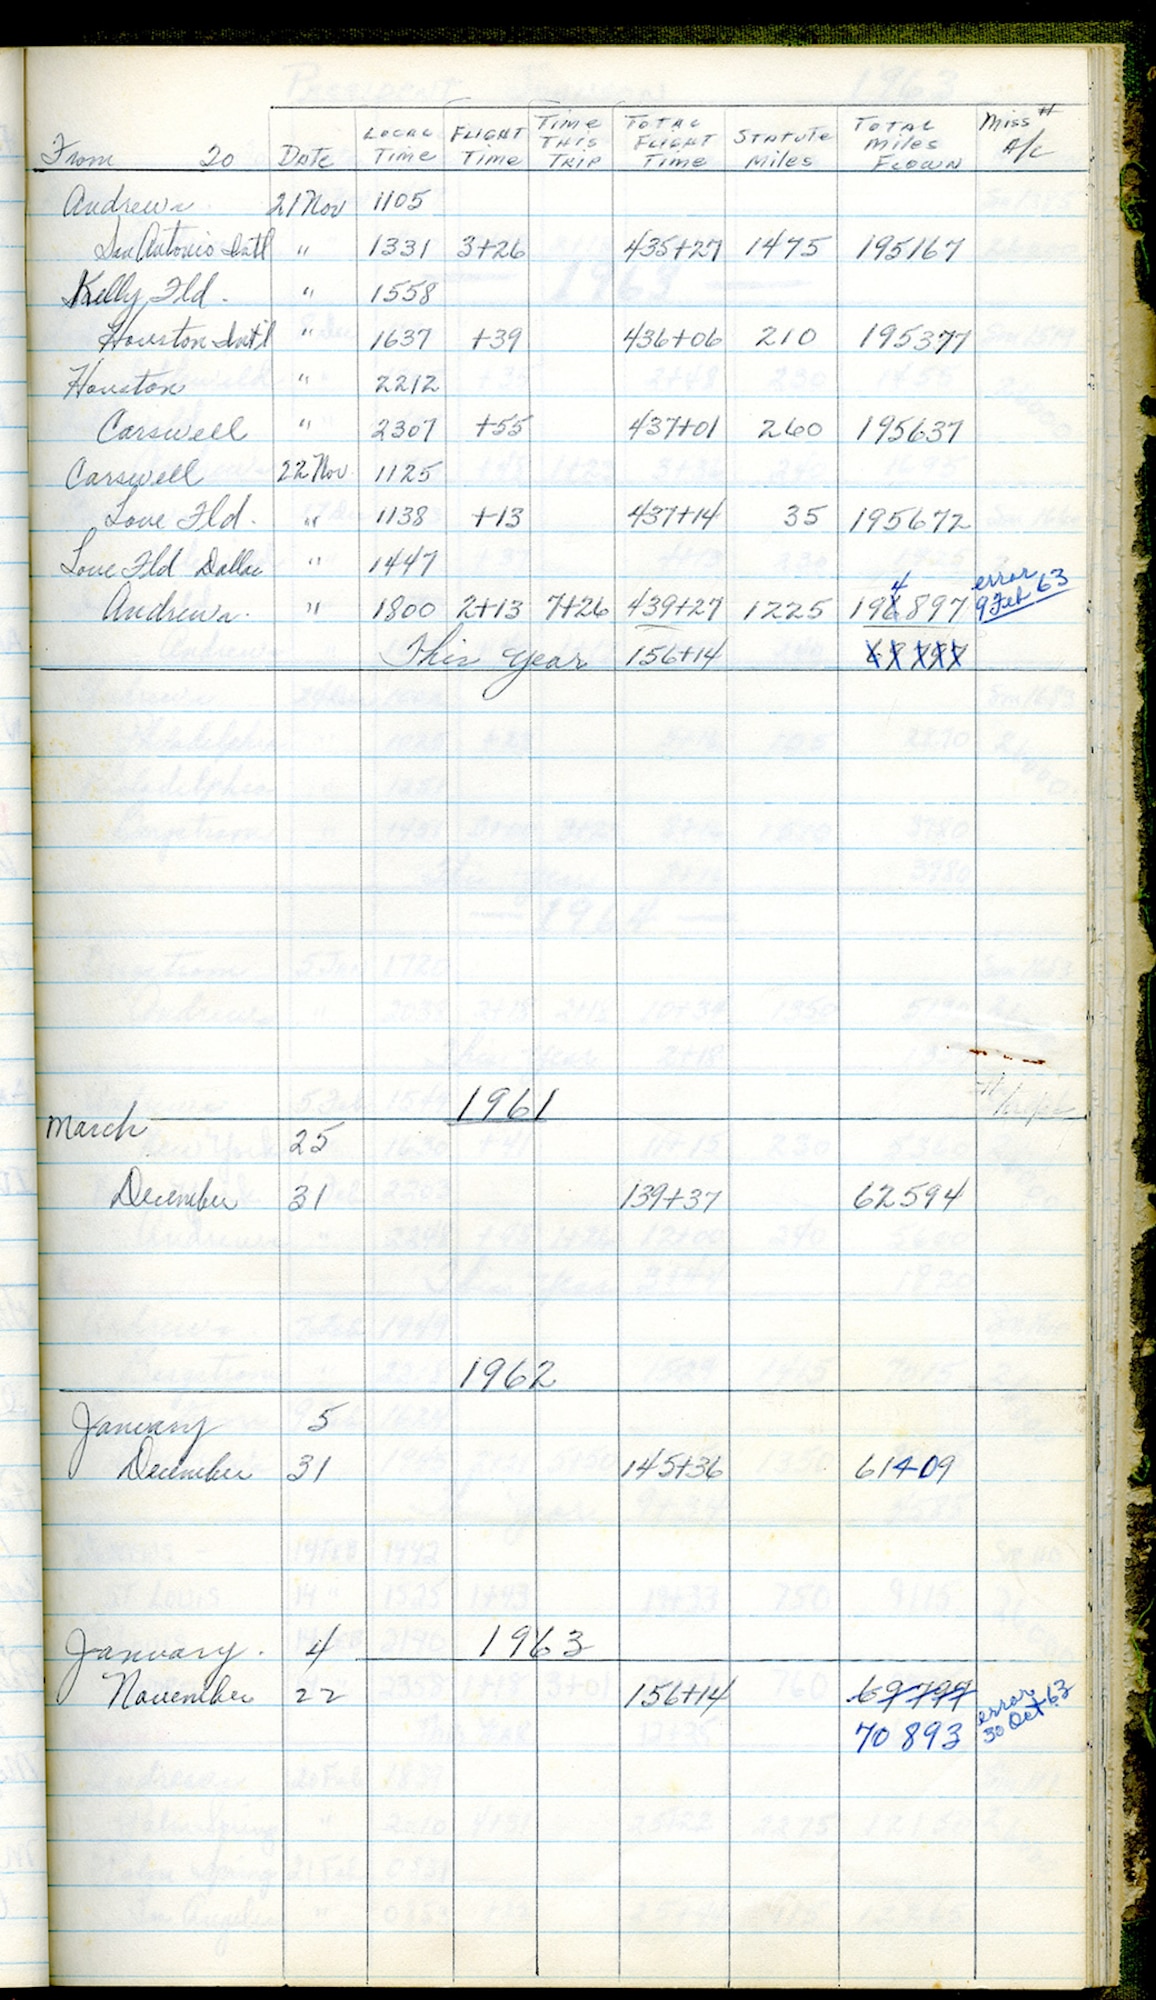 This scan from the SAM 26000 logbook shows the entries made on Nov. 22, 1963, the day President John F. Kennedy flew to Dallas, Texas, where he was assassinated. It logs President Kennedy's final flight from Dallas (Love Field) to Andrews Air Force Base. On this flight Kennedy's body was returned to Washington, D.C. (U.S. Air Force photo)